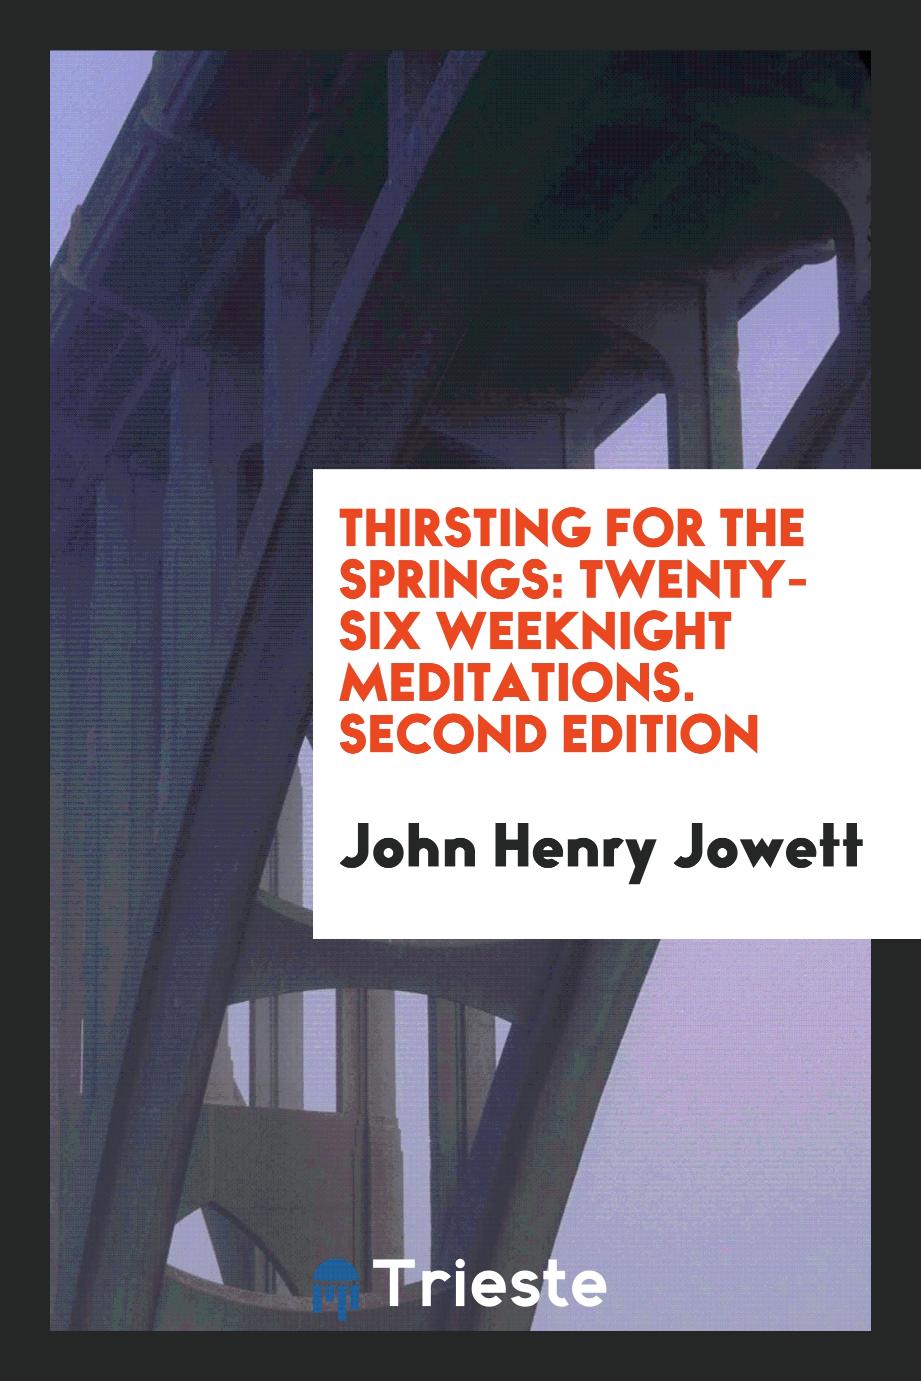 Thirsting for the springs: twenty-six weeknight meditations. Second Edition